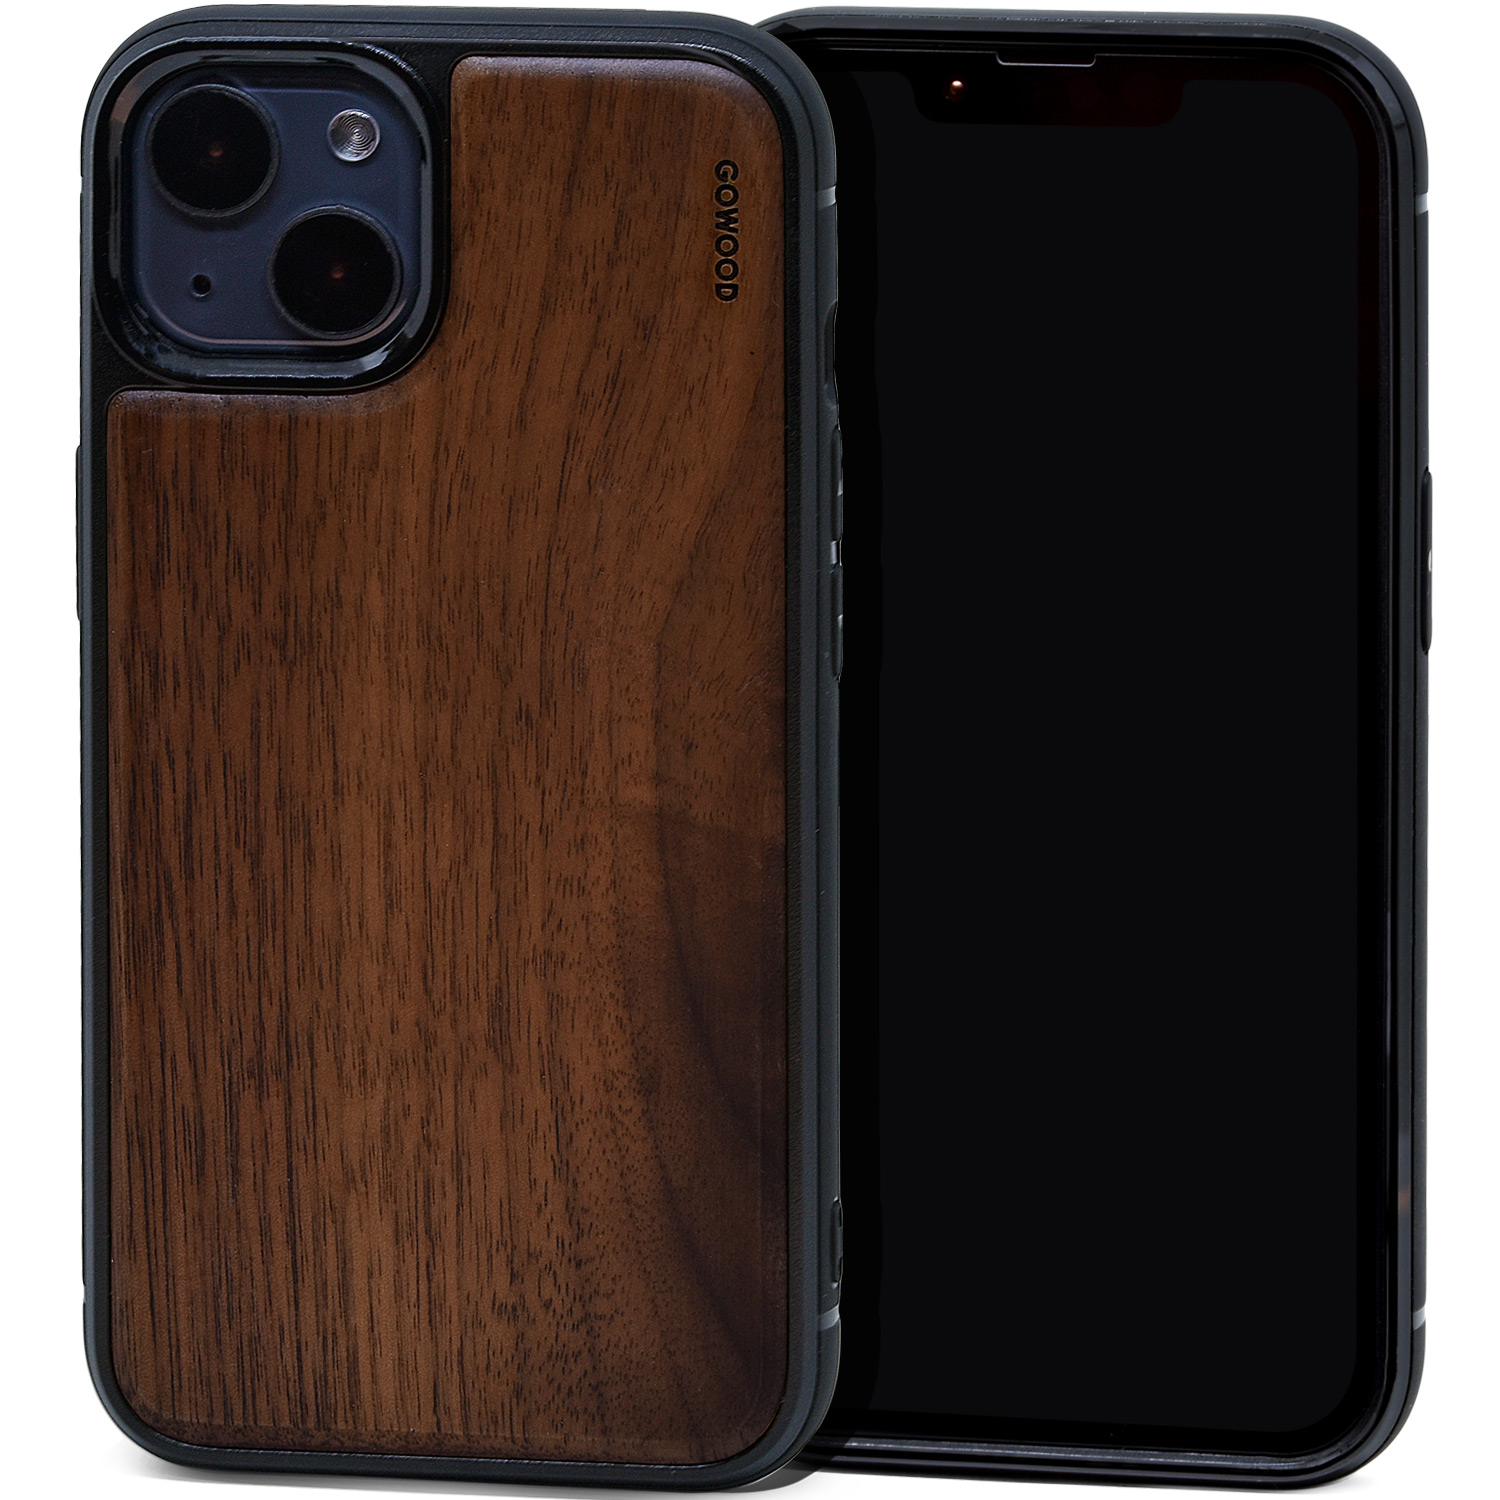 Walnut wood phone cases for iPhone 13